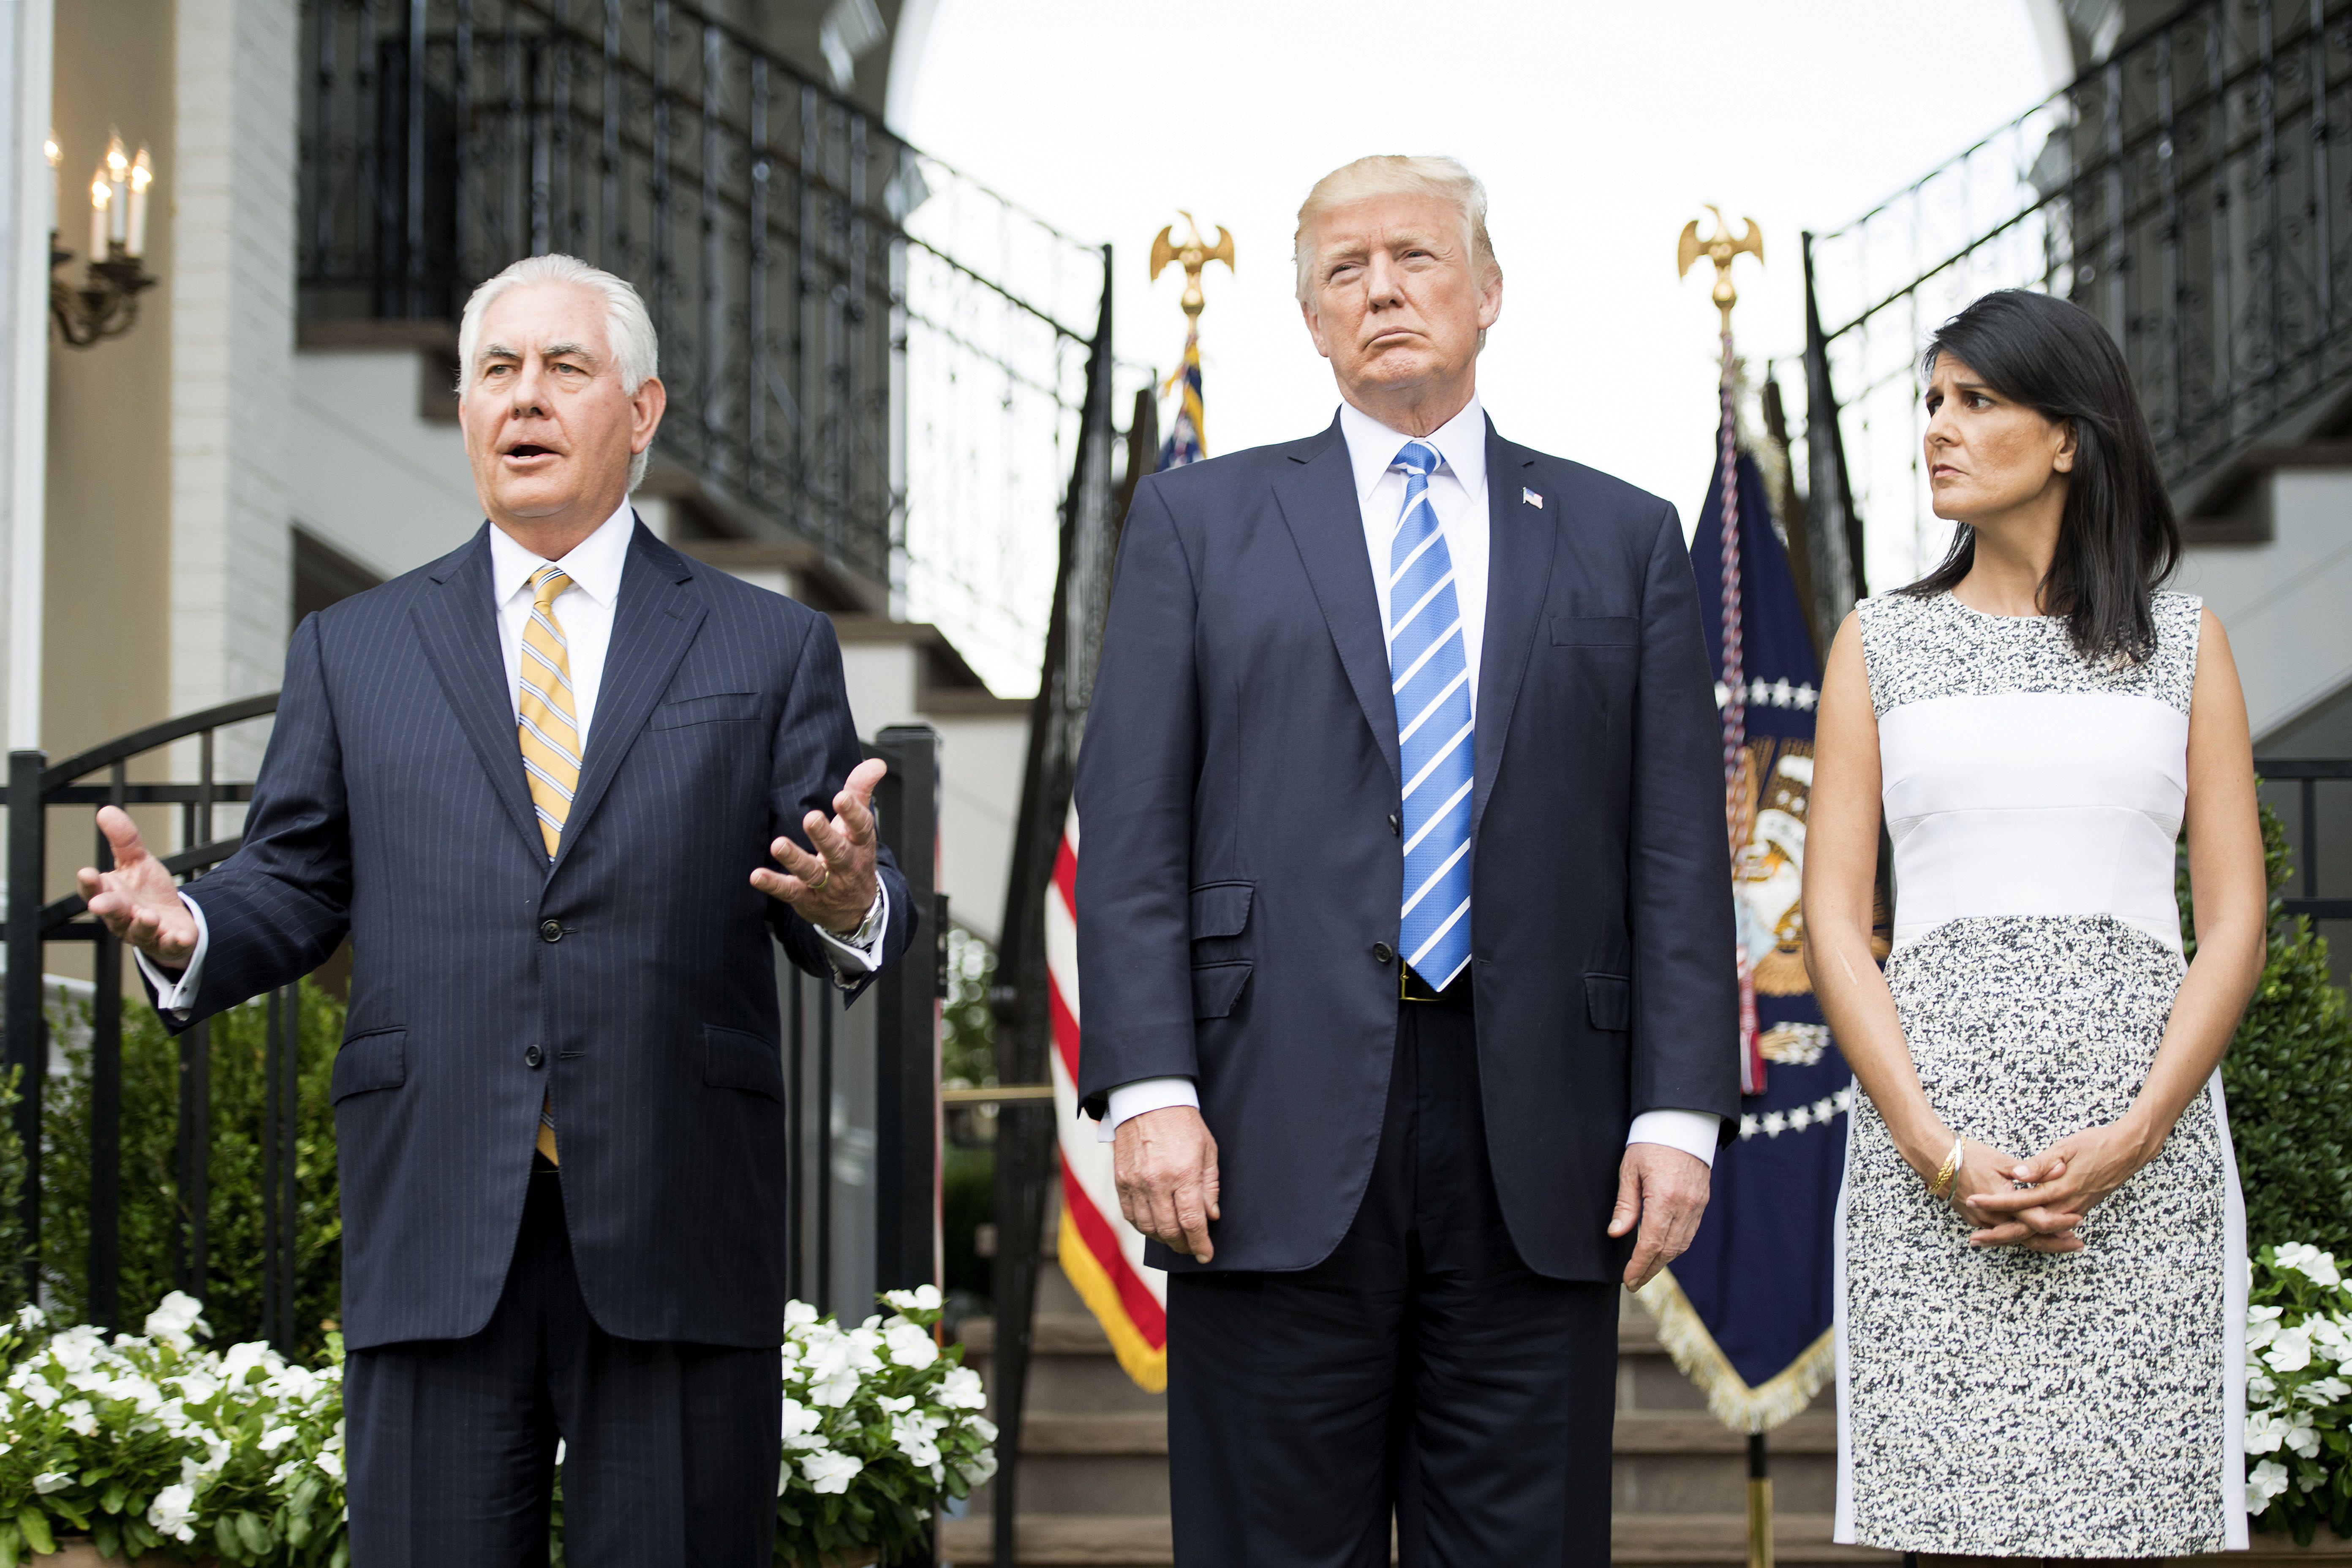 Then-Secretary of State Rex Tillerson (L) speaks to the press with US President Donald Trump (C) and then-U.S. Ambassador to the United Nations Nikki Haley (R) on August 11, 2017, at Trump National Golf Club in Bedminster, New Jersey. 